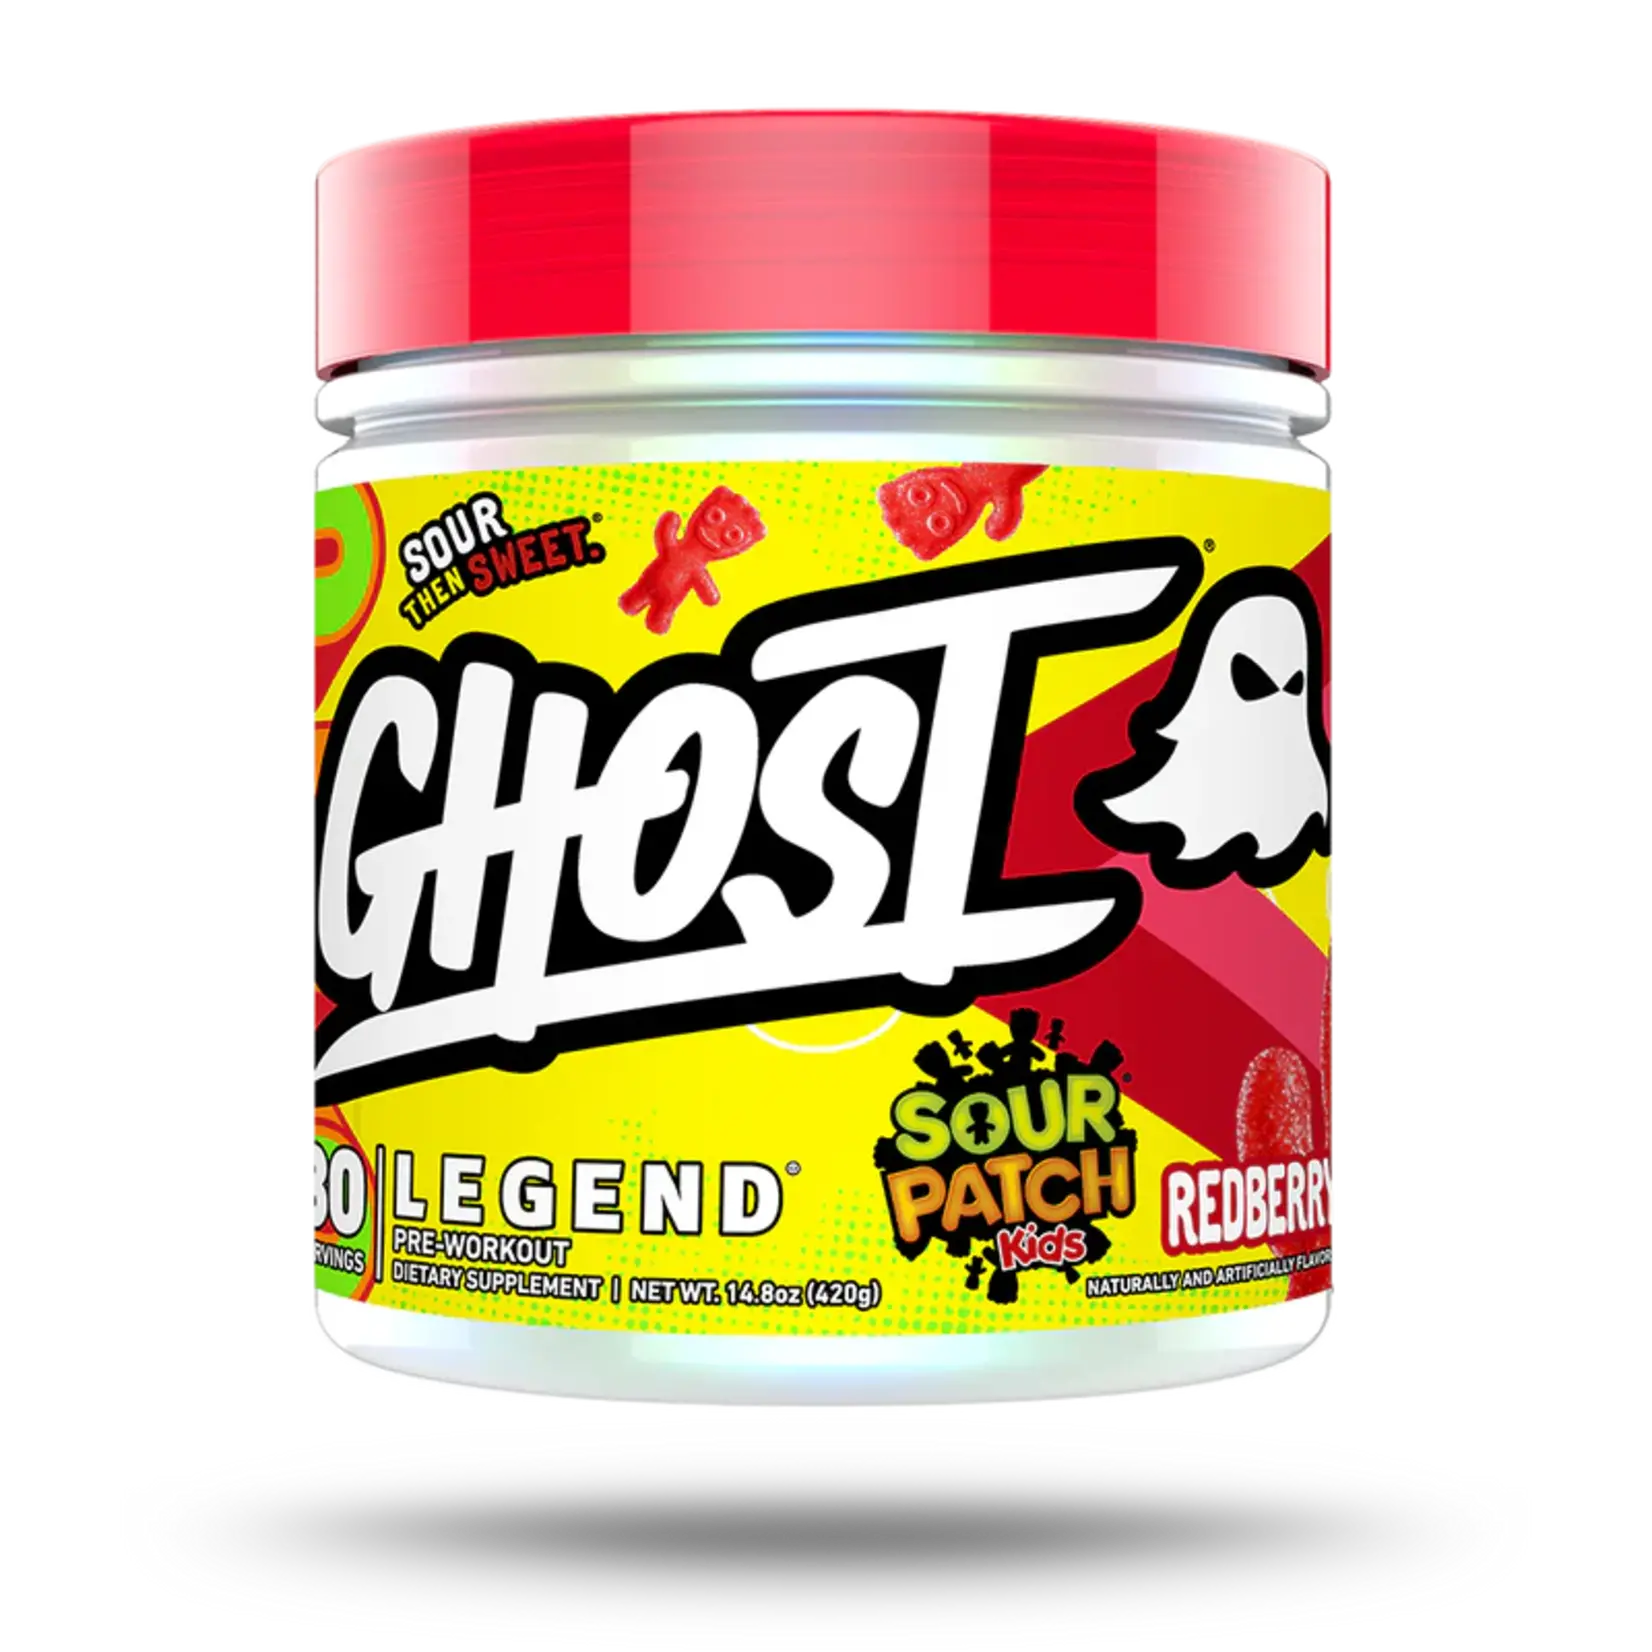 Ghost Ghost Legend Pre-Workout